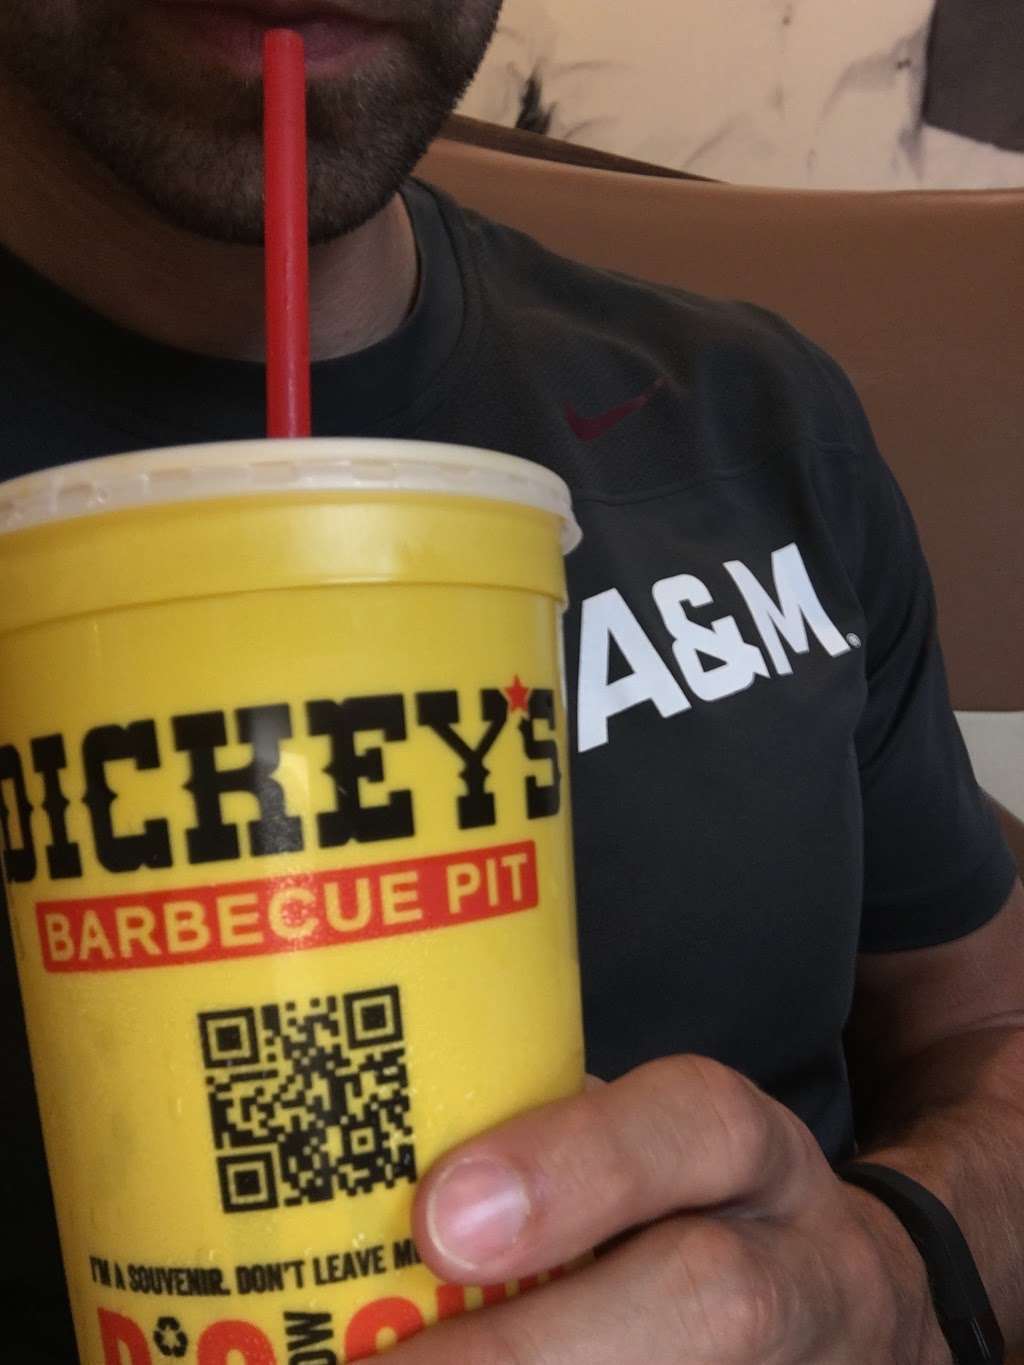 Dickeys Barbecue Pit | 1301 Century Way, Wylie, TX 75098 | Phone: (972) 429-8525